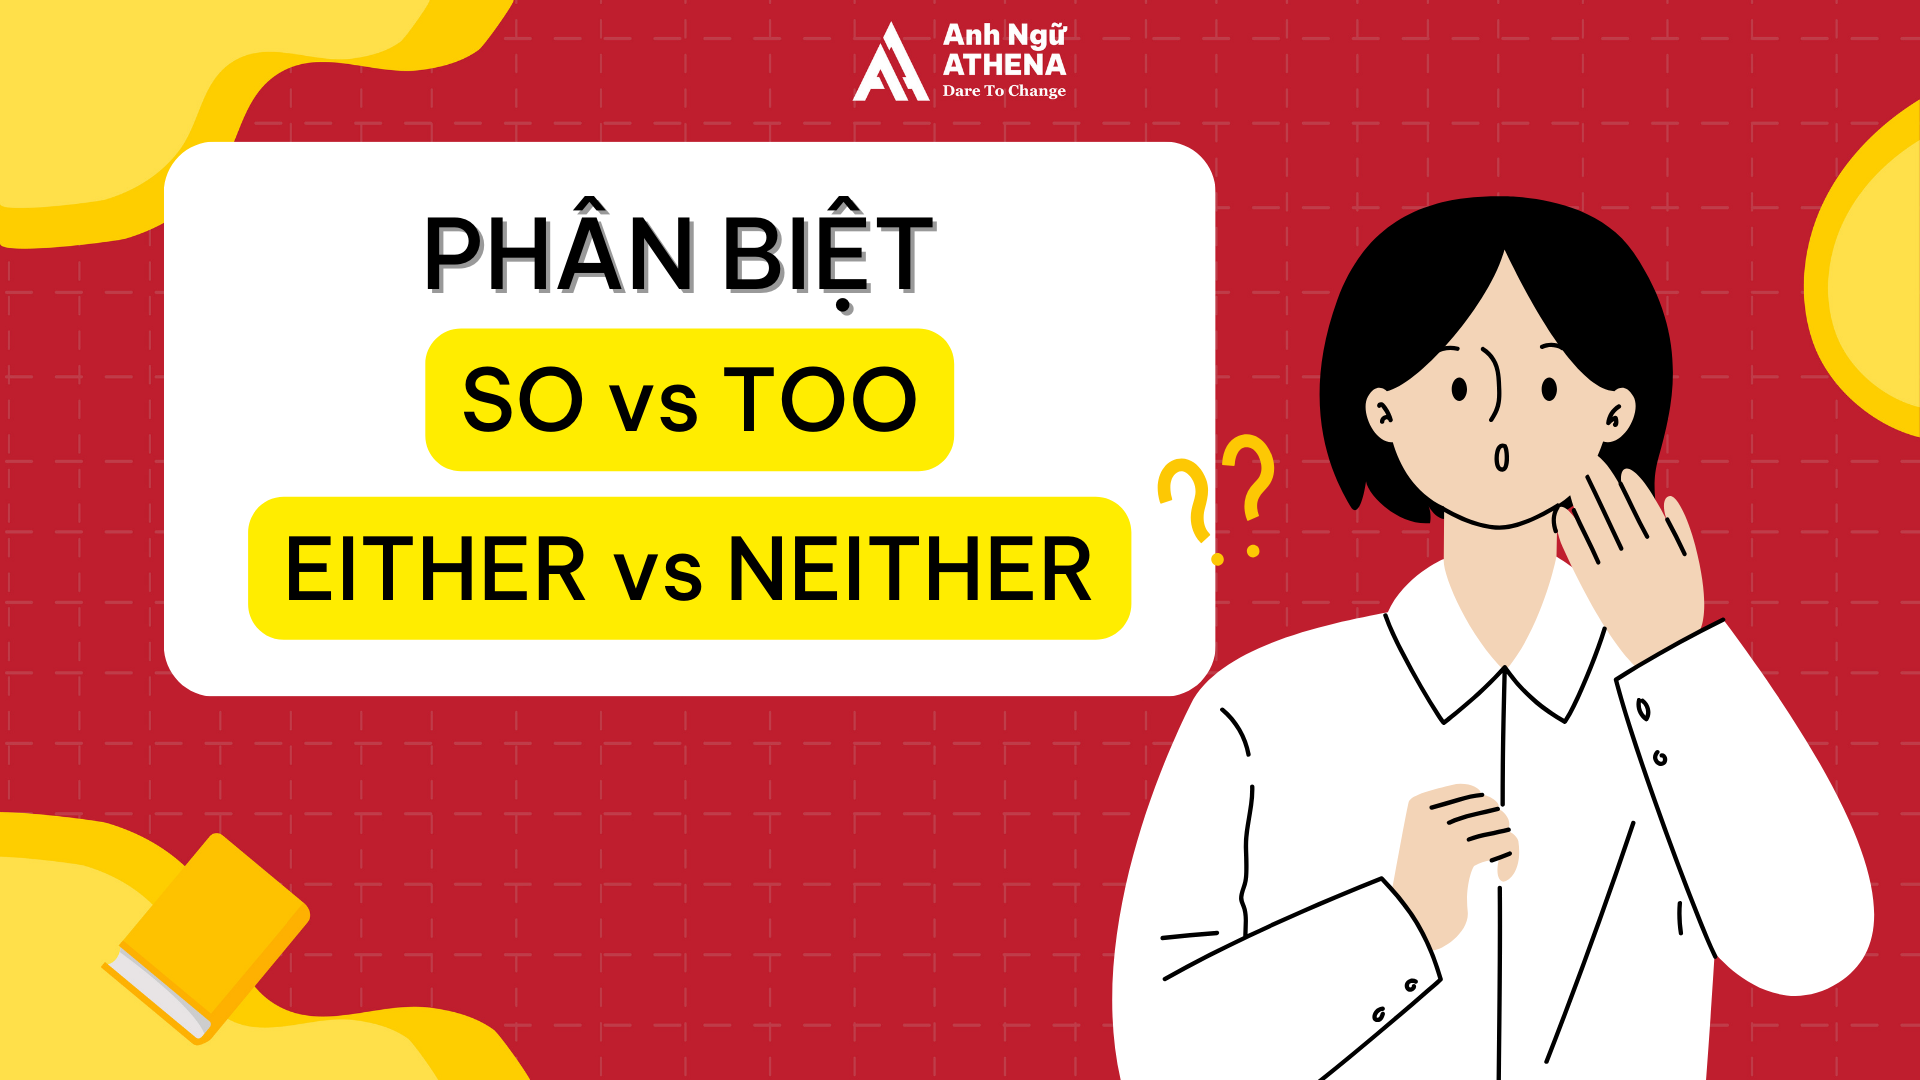 PHÂN BIỆT TOO, SO, EITHER, NEITHER